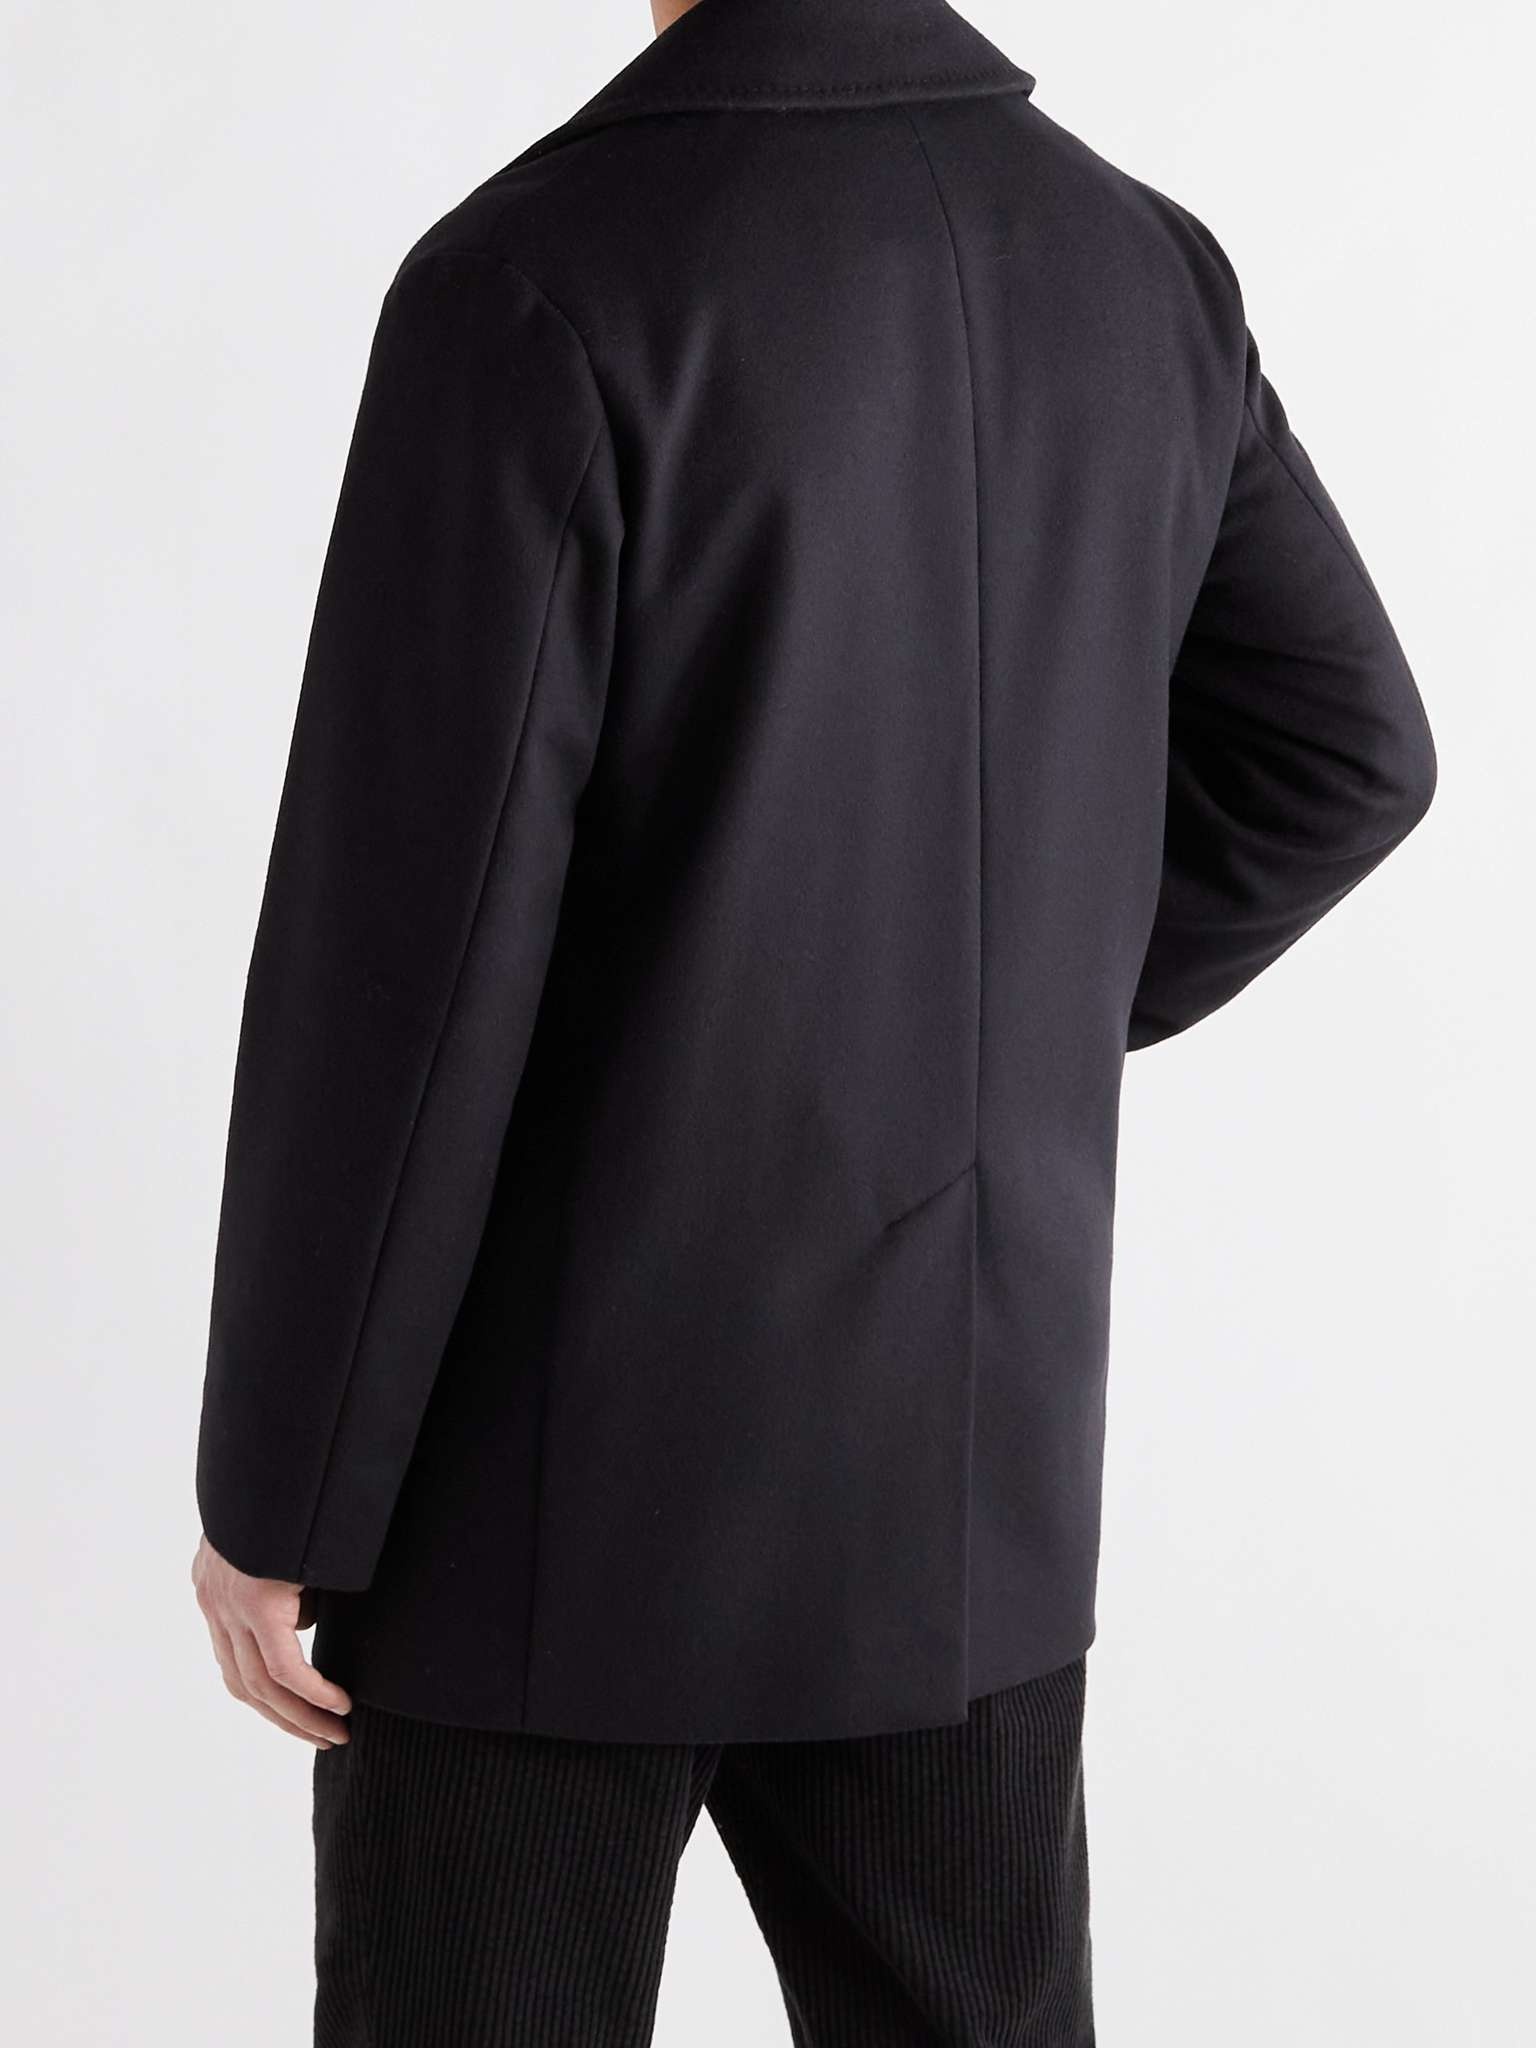 Dalton Wool and Cashmere-Blend Peacoat - 4